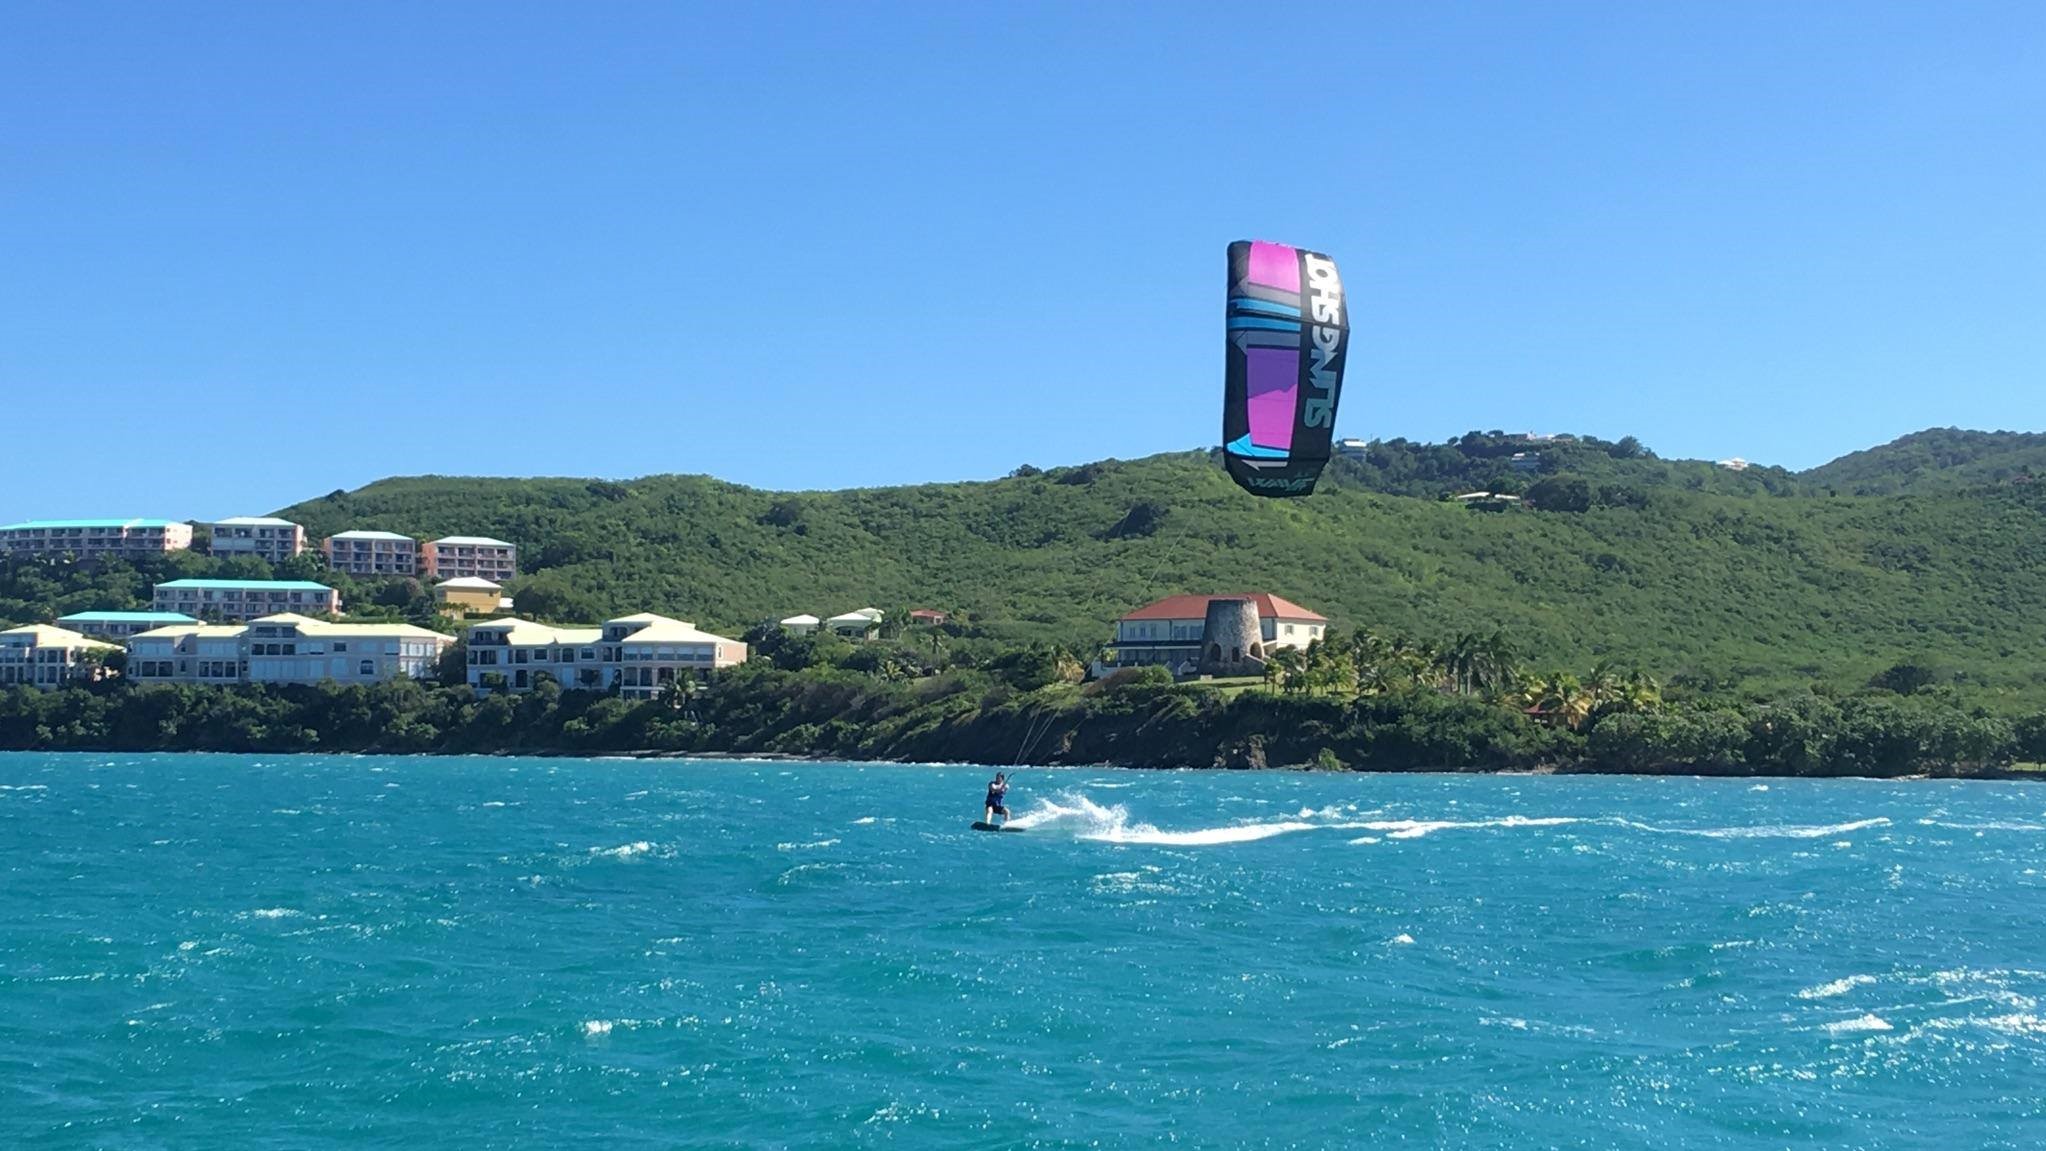 Kiteboarding lesson on a beautiful caribbean day in St Croix.